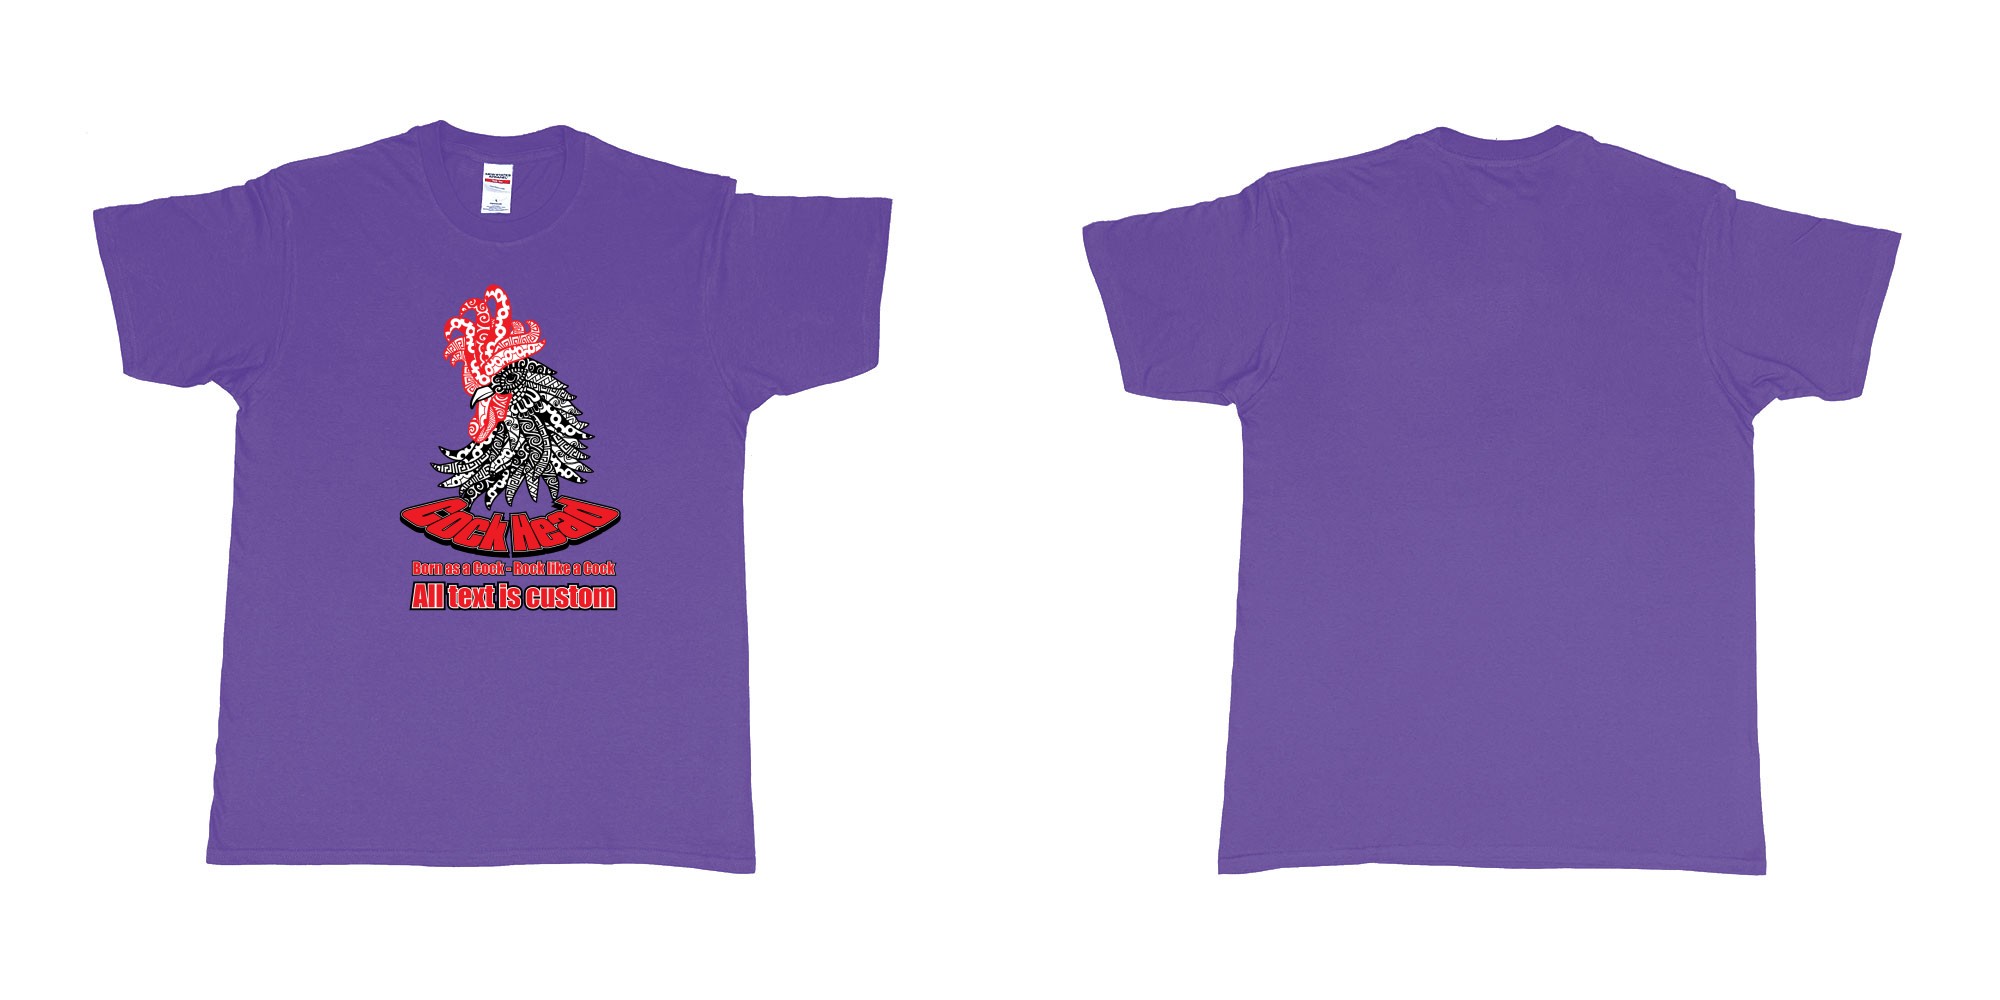 Custom tshirt design cock head rooster zodiac sign in fabric color purple choice your own text made in Bali by The Pirate Way